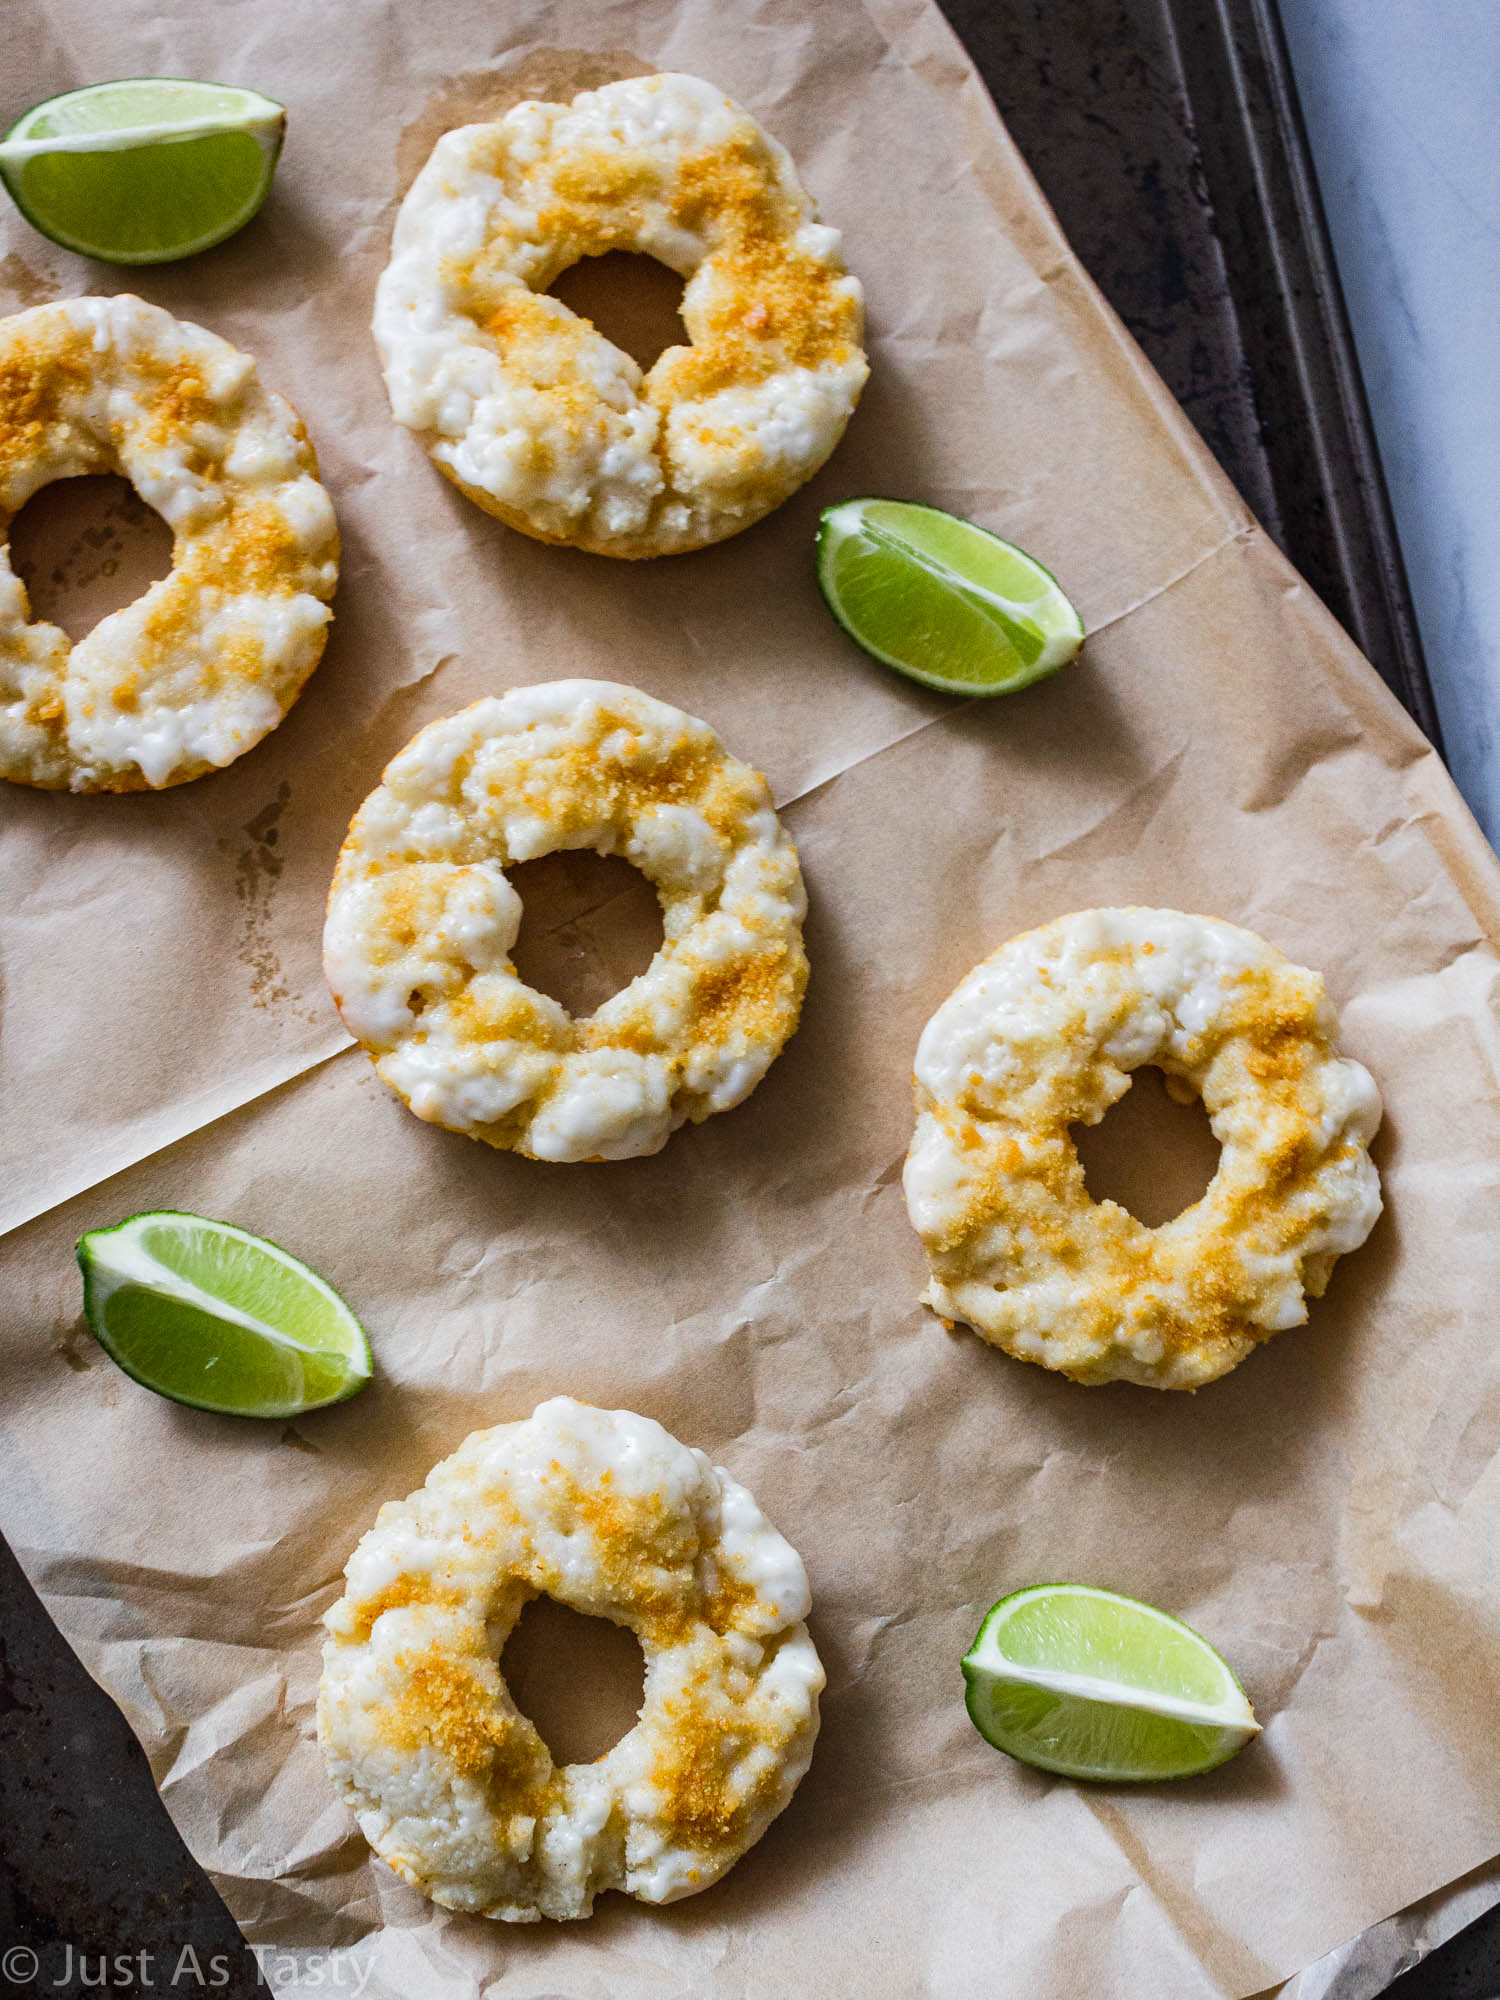 Glazed key lime donuts on parchment paper surrounded by lime wedges.